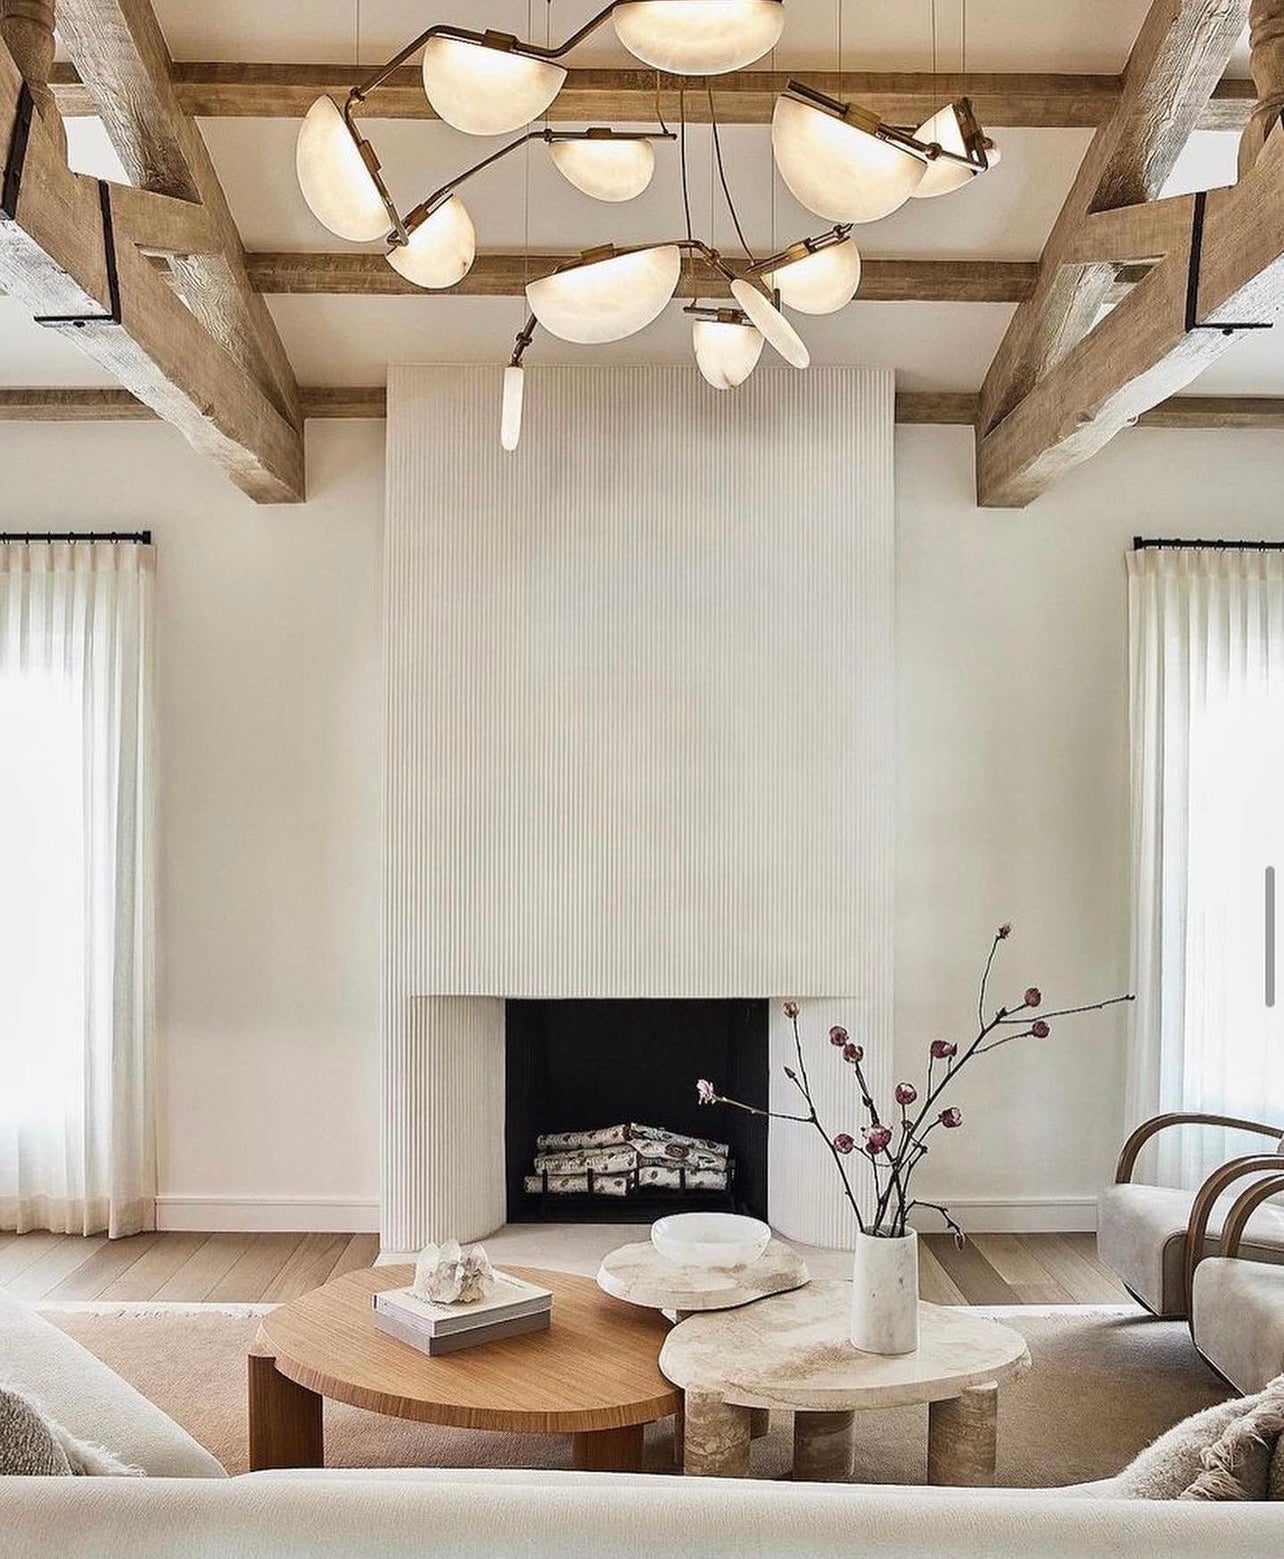 Alabaste lighting looks fabulous with wood beams running through a room.